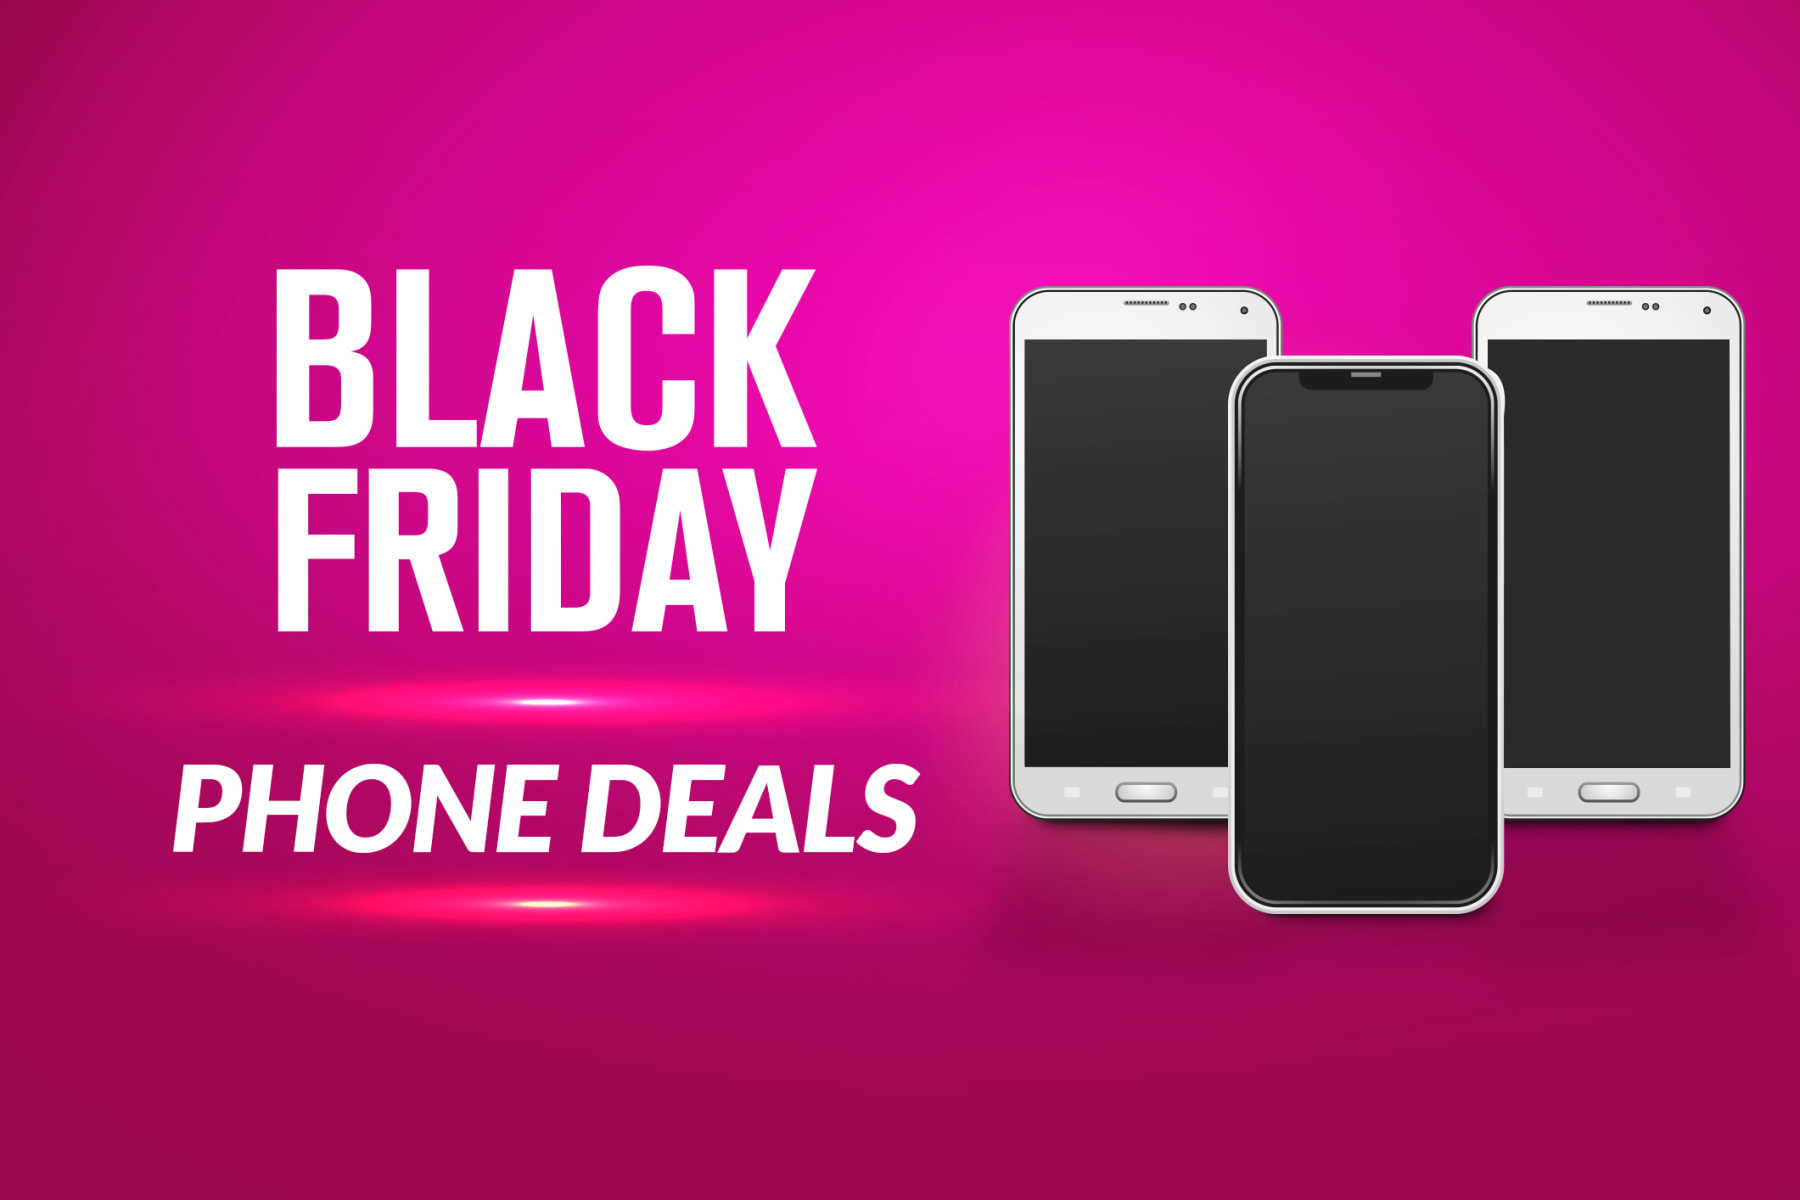 Phones sit next to text that reads Black Friday Phone Deals.